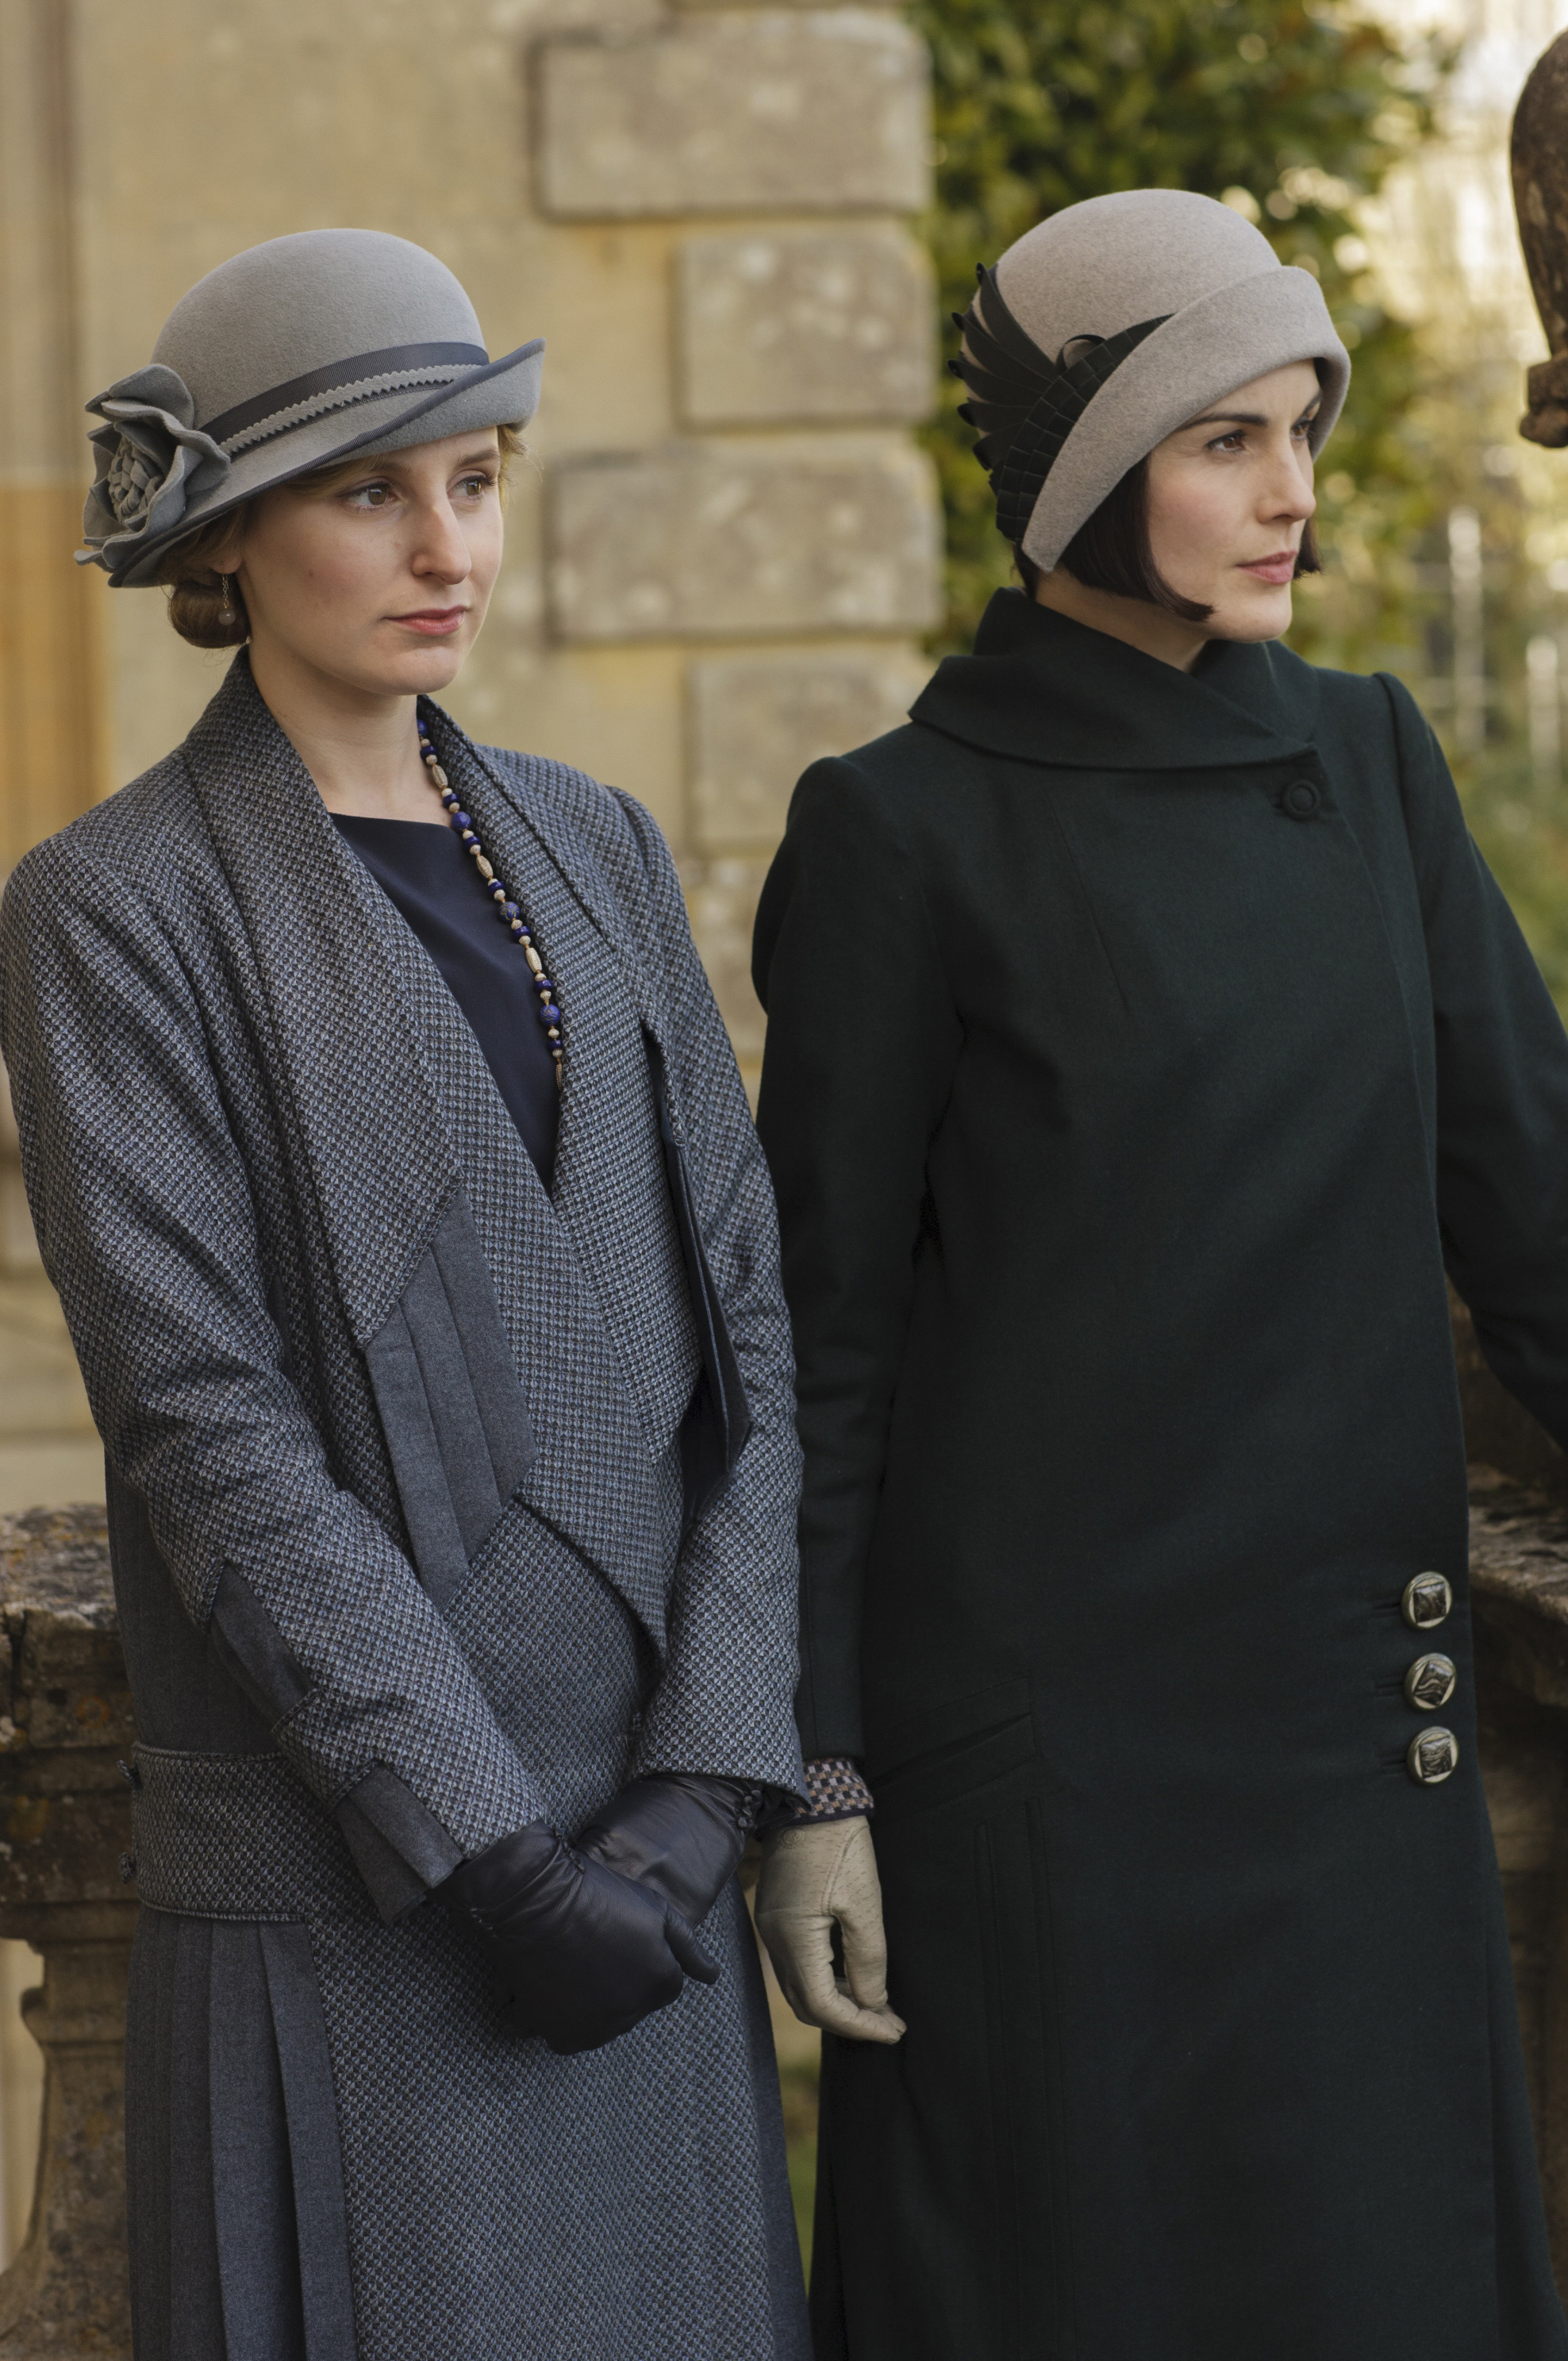 <p>The icing on top of our favorite "Downton Abbey" looks? Aside from the jewels, it's got to be the hats -- like these worn by <a href="https://www.wonderwall.com/celebrity/profiles/overview/michelle-dockery-1488.article">Michelle Dockery</a> (as Lady Mary) and Laura Carmichael (as Lady Edith) on season 6 of "Downton Abbey." "We use a combination of original hats and we make a lot of hats from scratch," costume designer Anna Mary Scott Robbins told <a href="https://fashionista.com/2015/02/downton-abbey-costume-designer-anna-robbins">Fashionista</a>. "It might be with an original trim I find or from an illustration that has an amazing color combination that I want to try."</p>